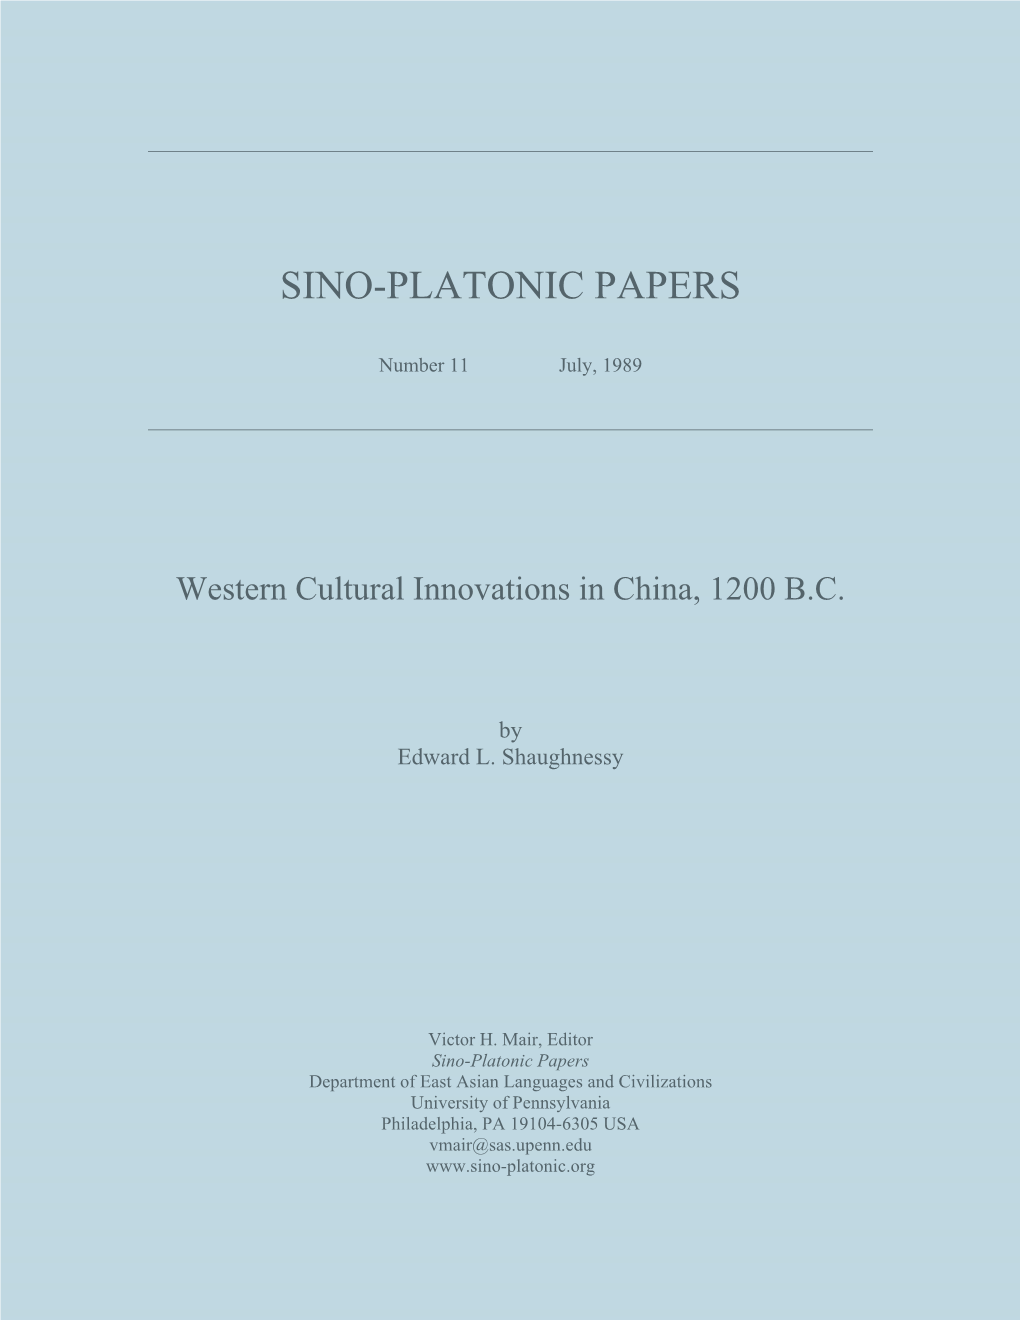 Western Cultural Innovations in China, 1200 B.C